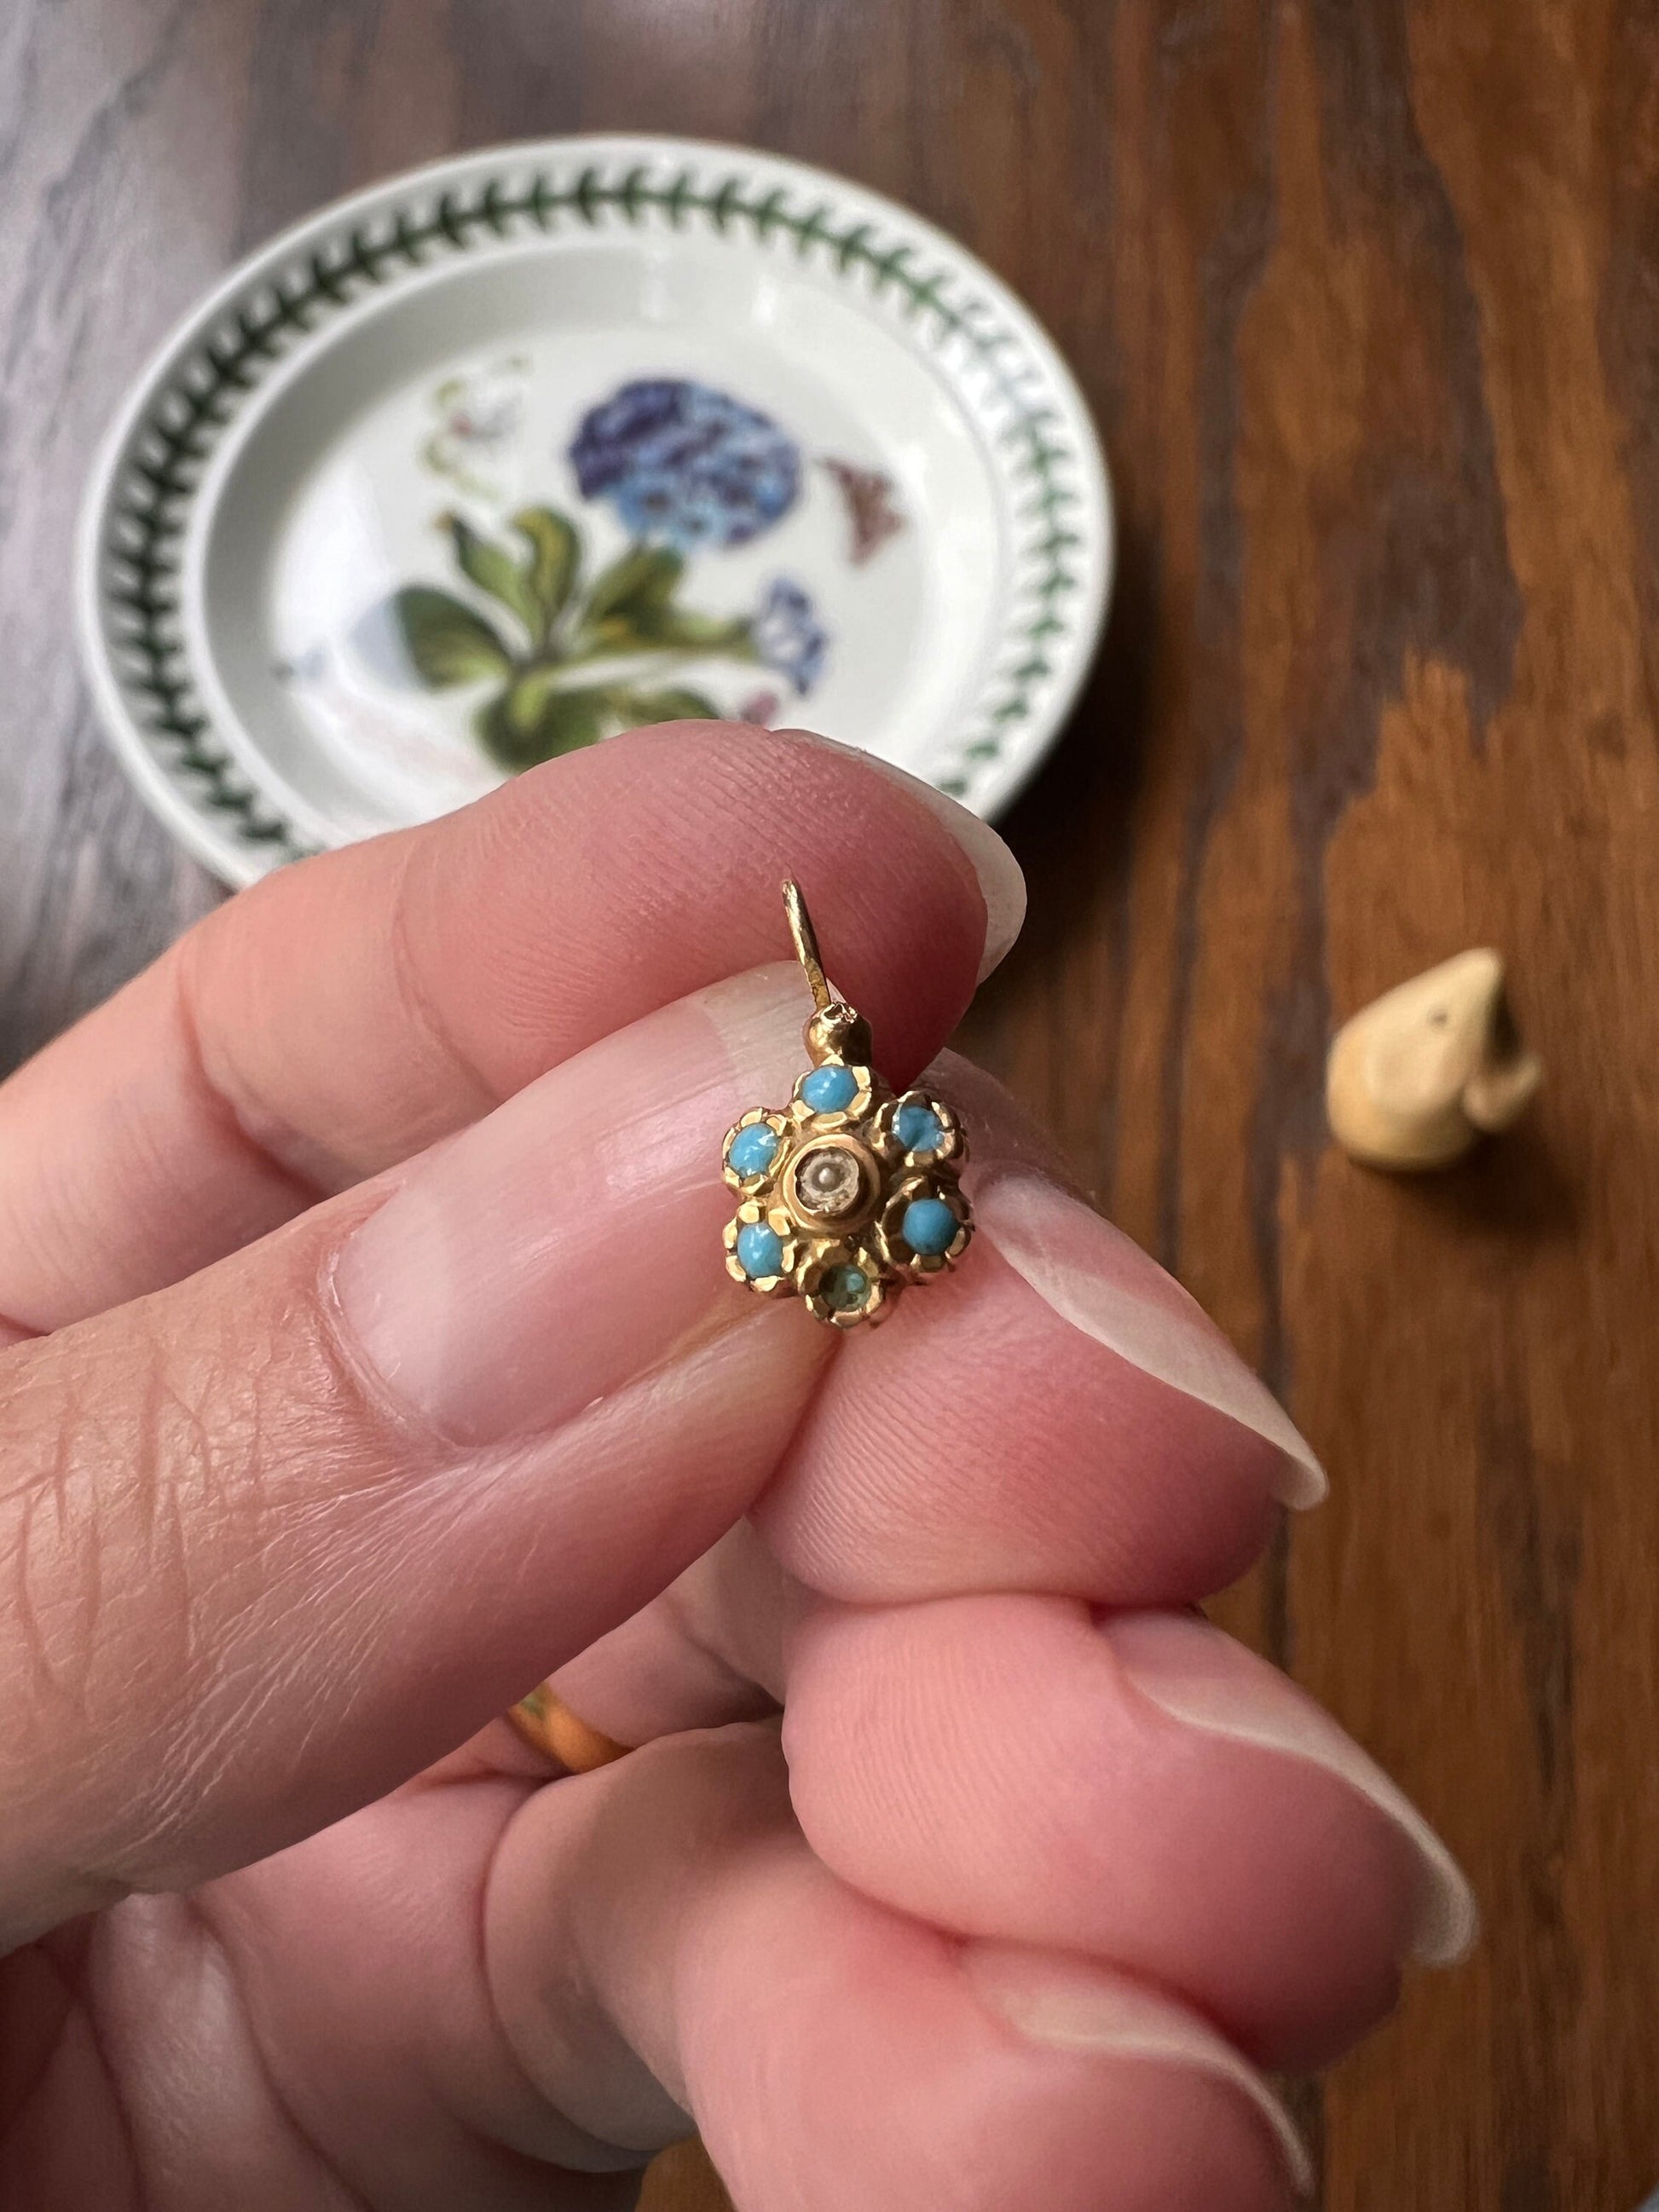 Floral Forget Me Not Antique Blue Enamel VICTORIAN Dainty SINGLE Earring French Dormeuse 18k Gold Minimalist Mix Match Something Old Bridal